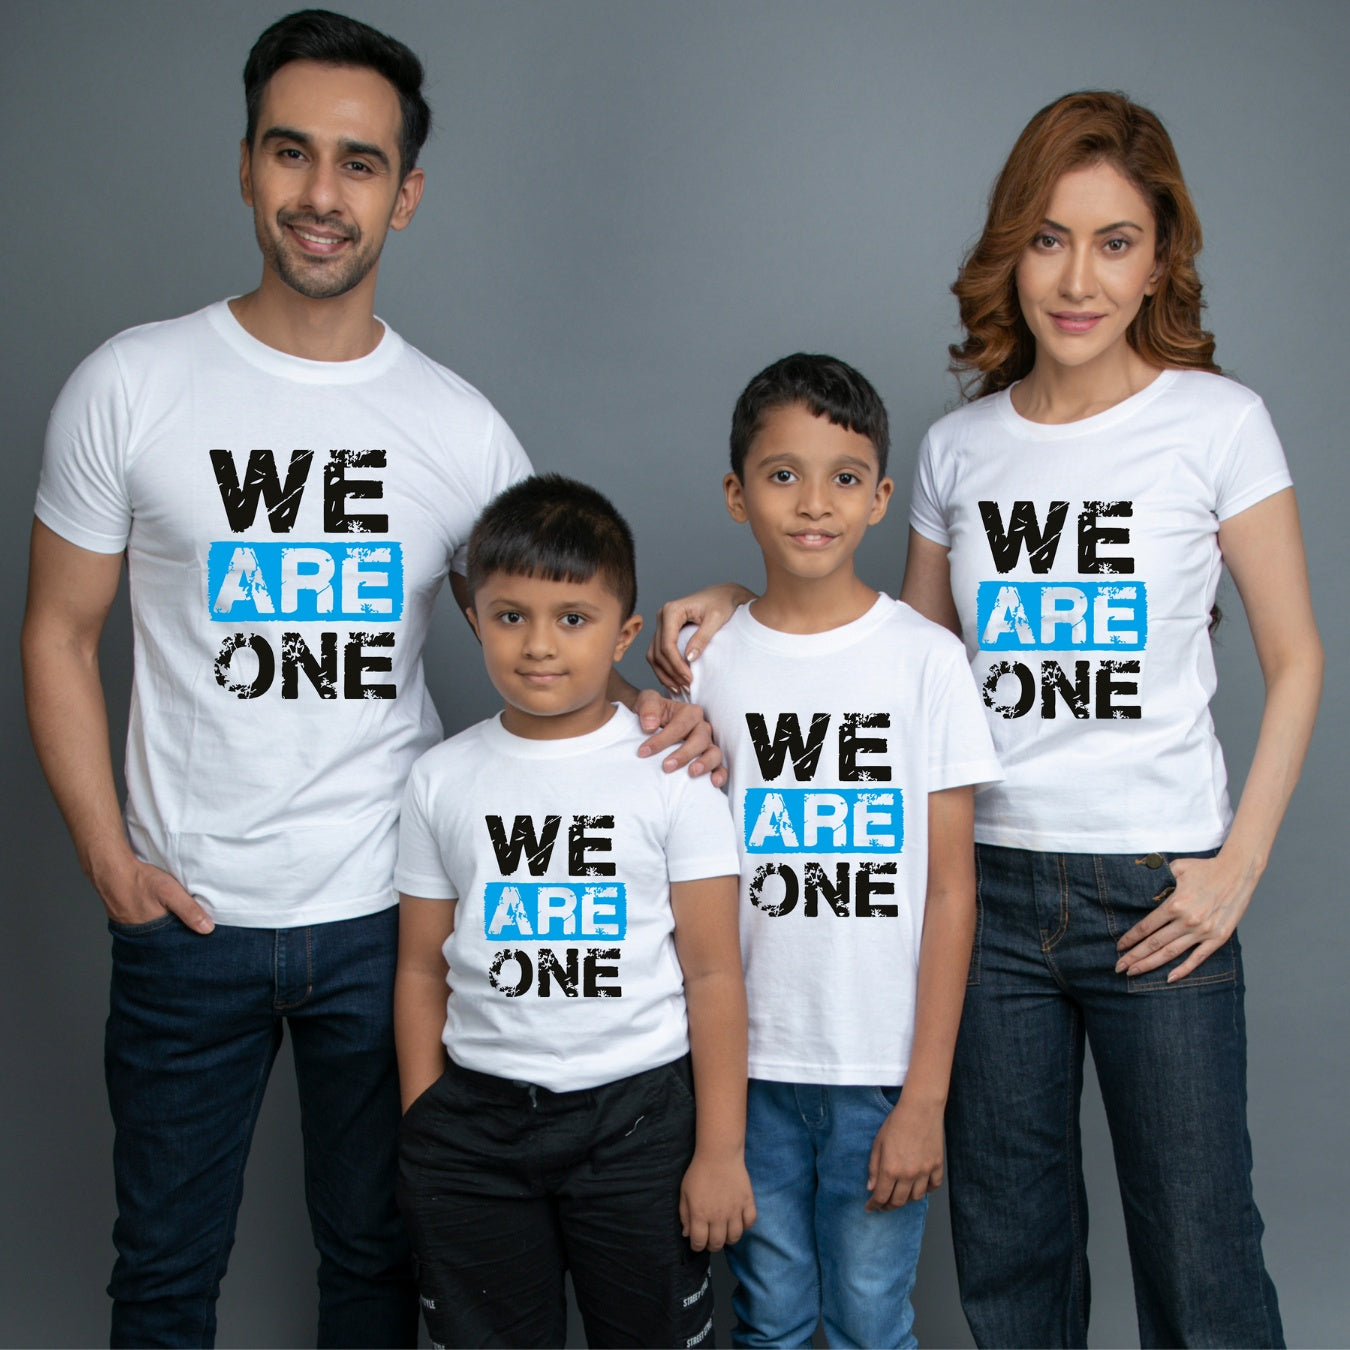 Family t shirts set of 4 Mom Dad Two Sons in White Colour - We Are One Variant